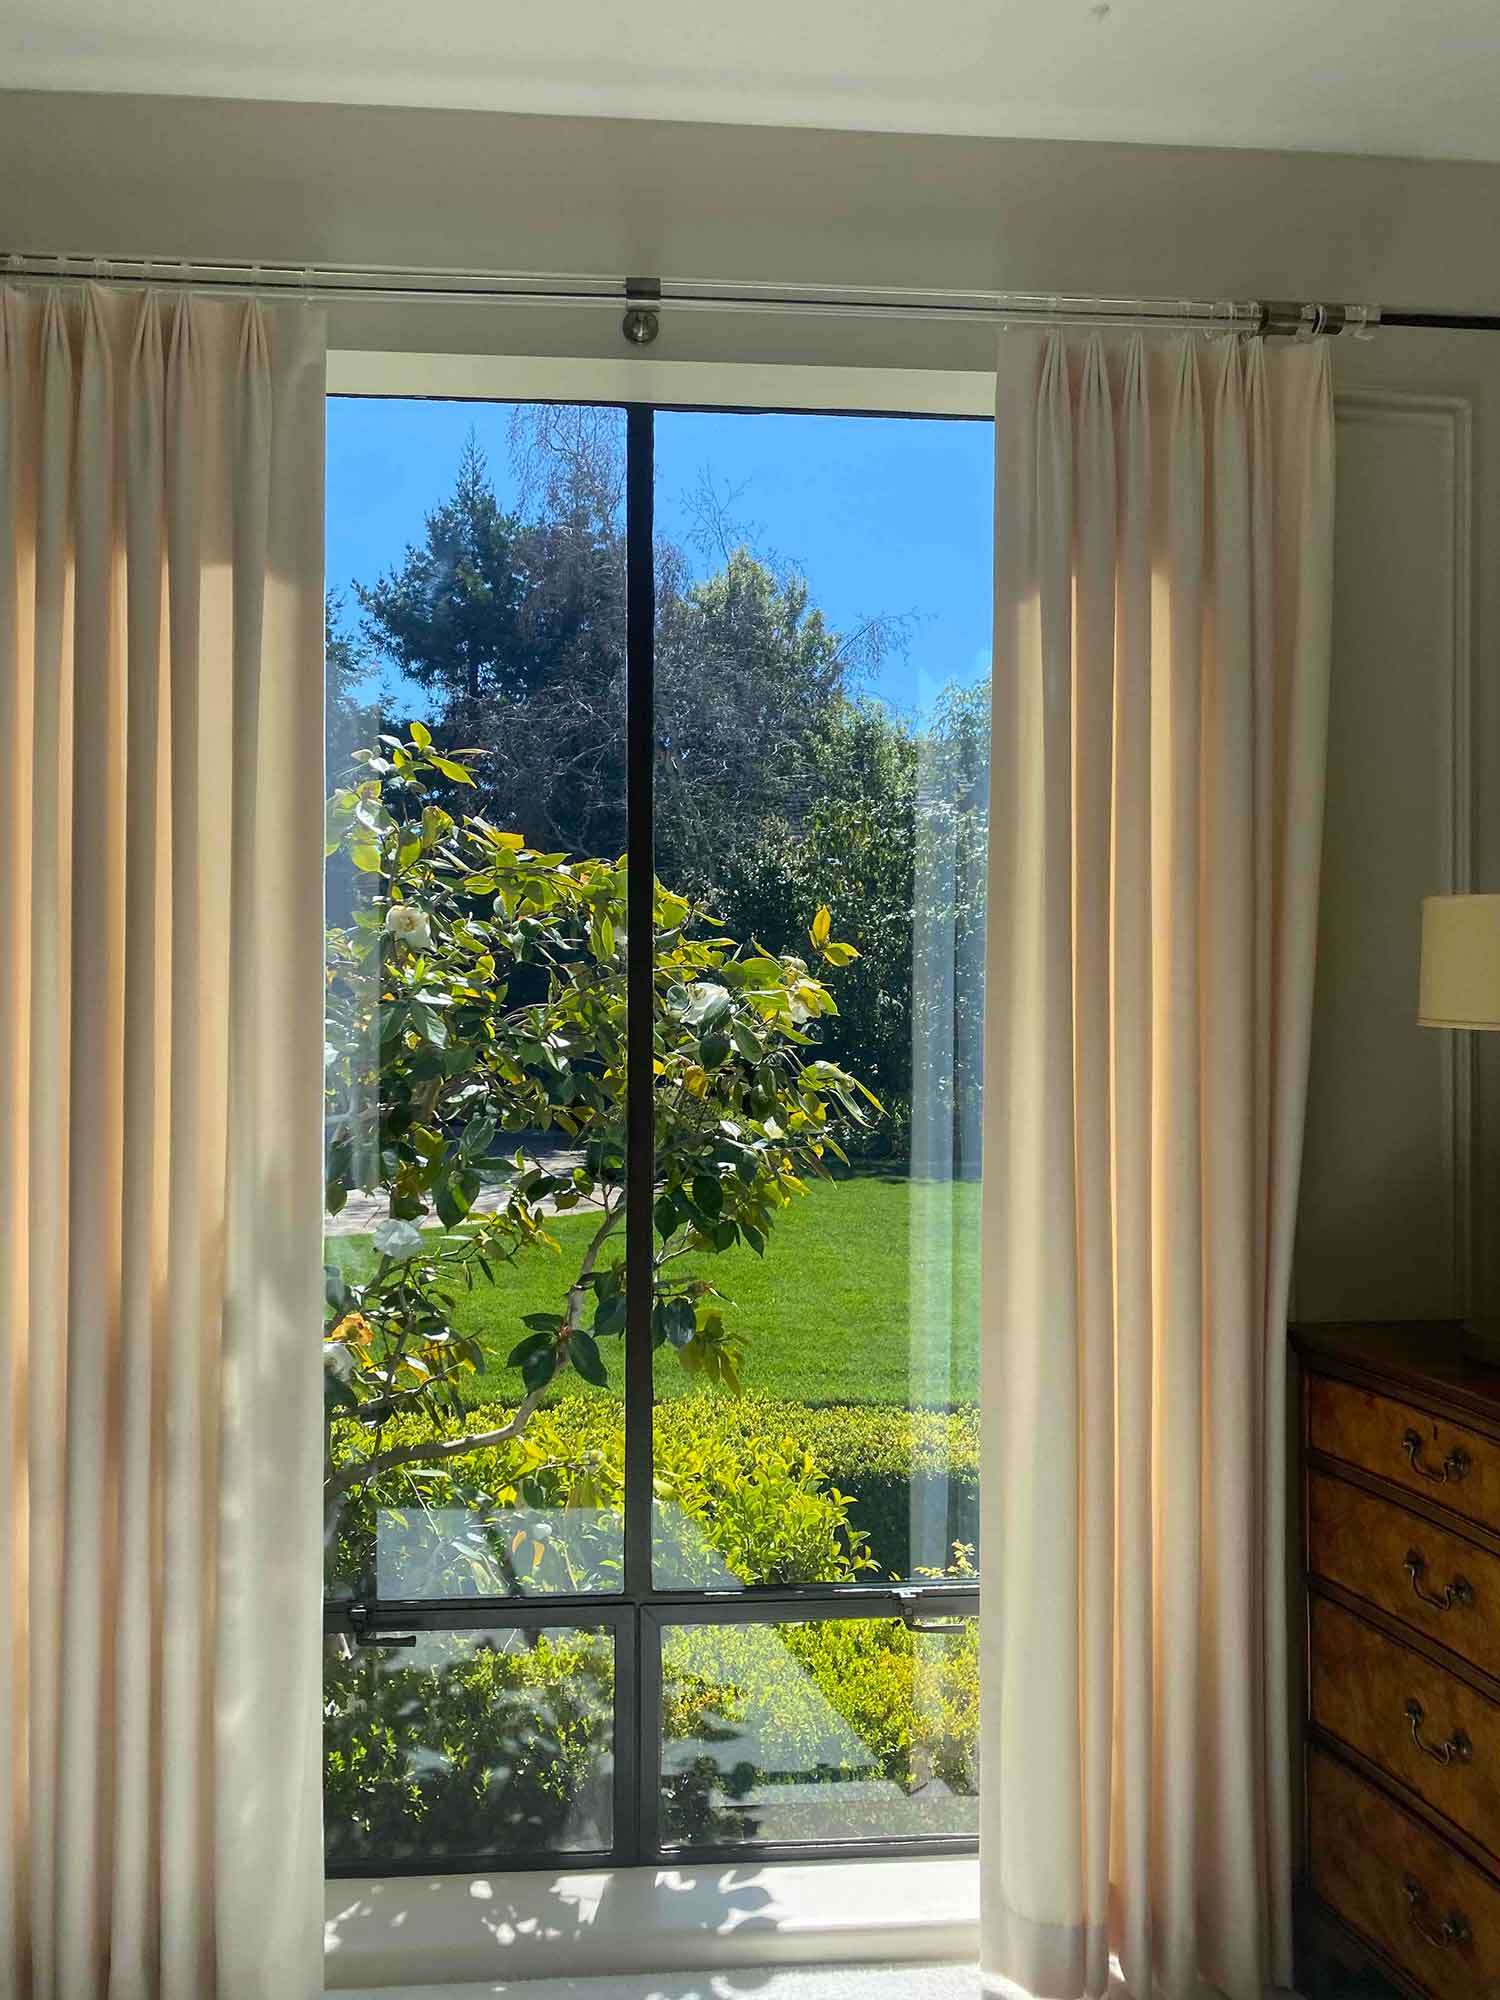 A beautiful view made better with 3M Window Film in Piedmont, CA. Installed by ClimatePro.